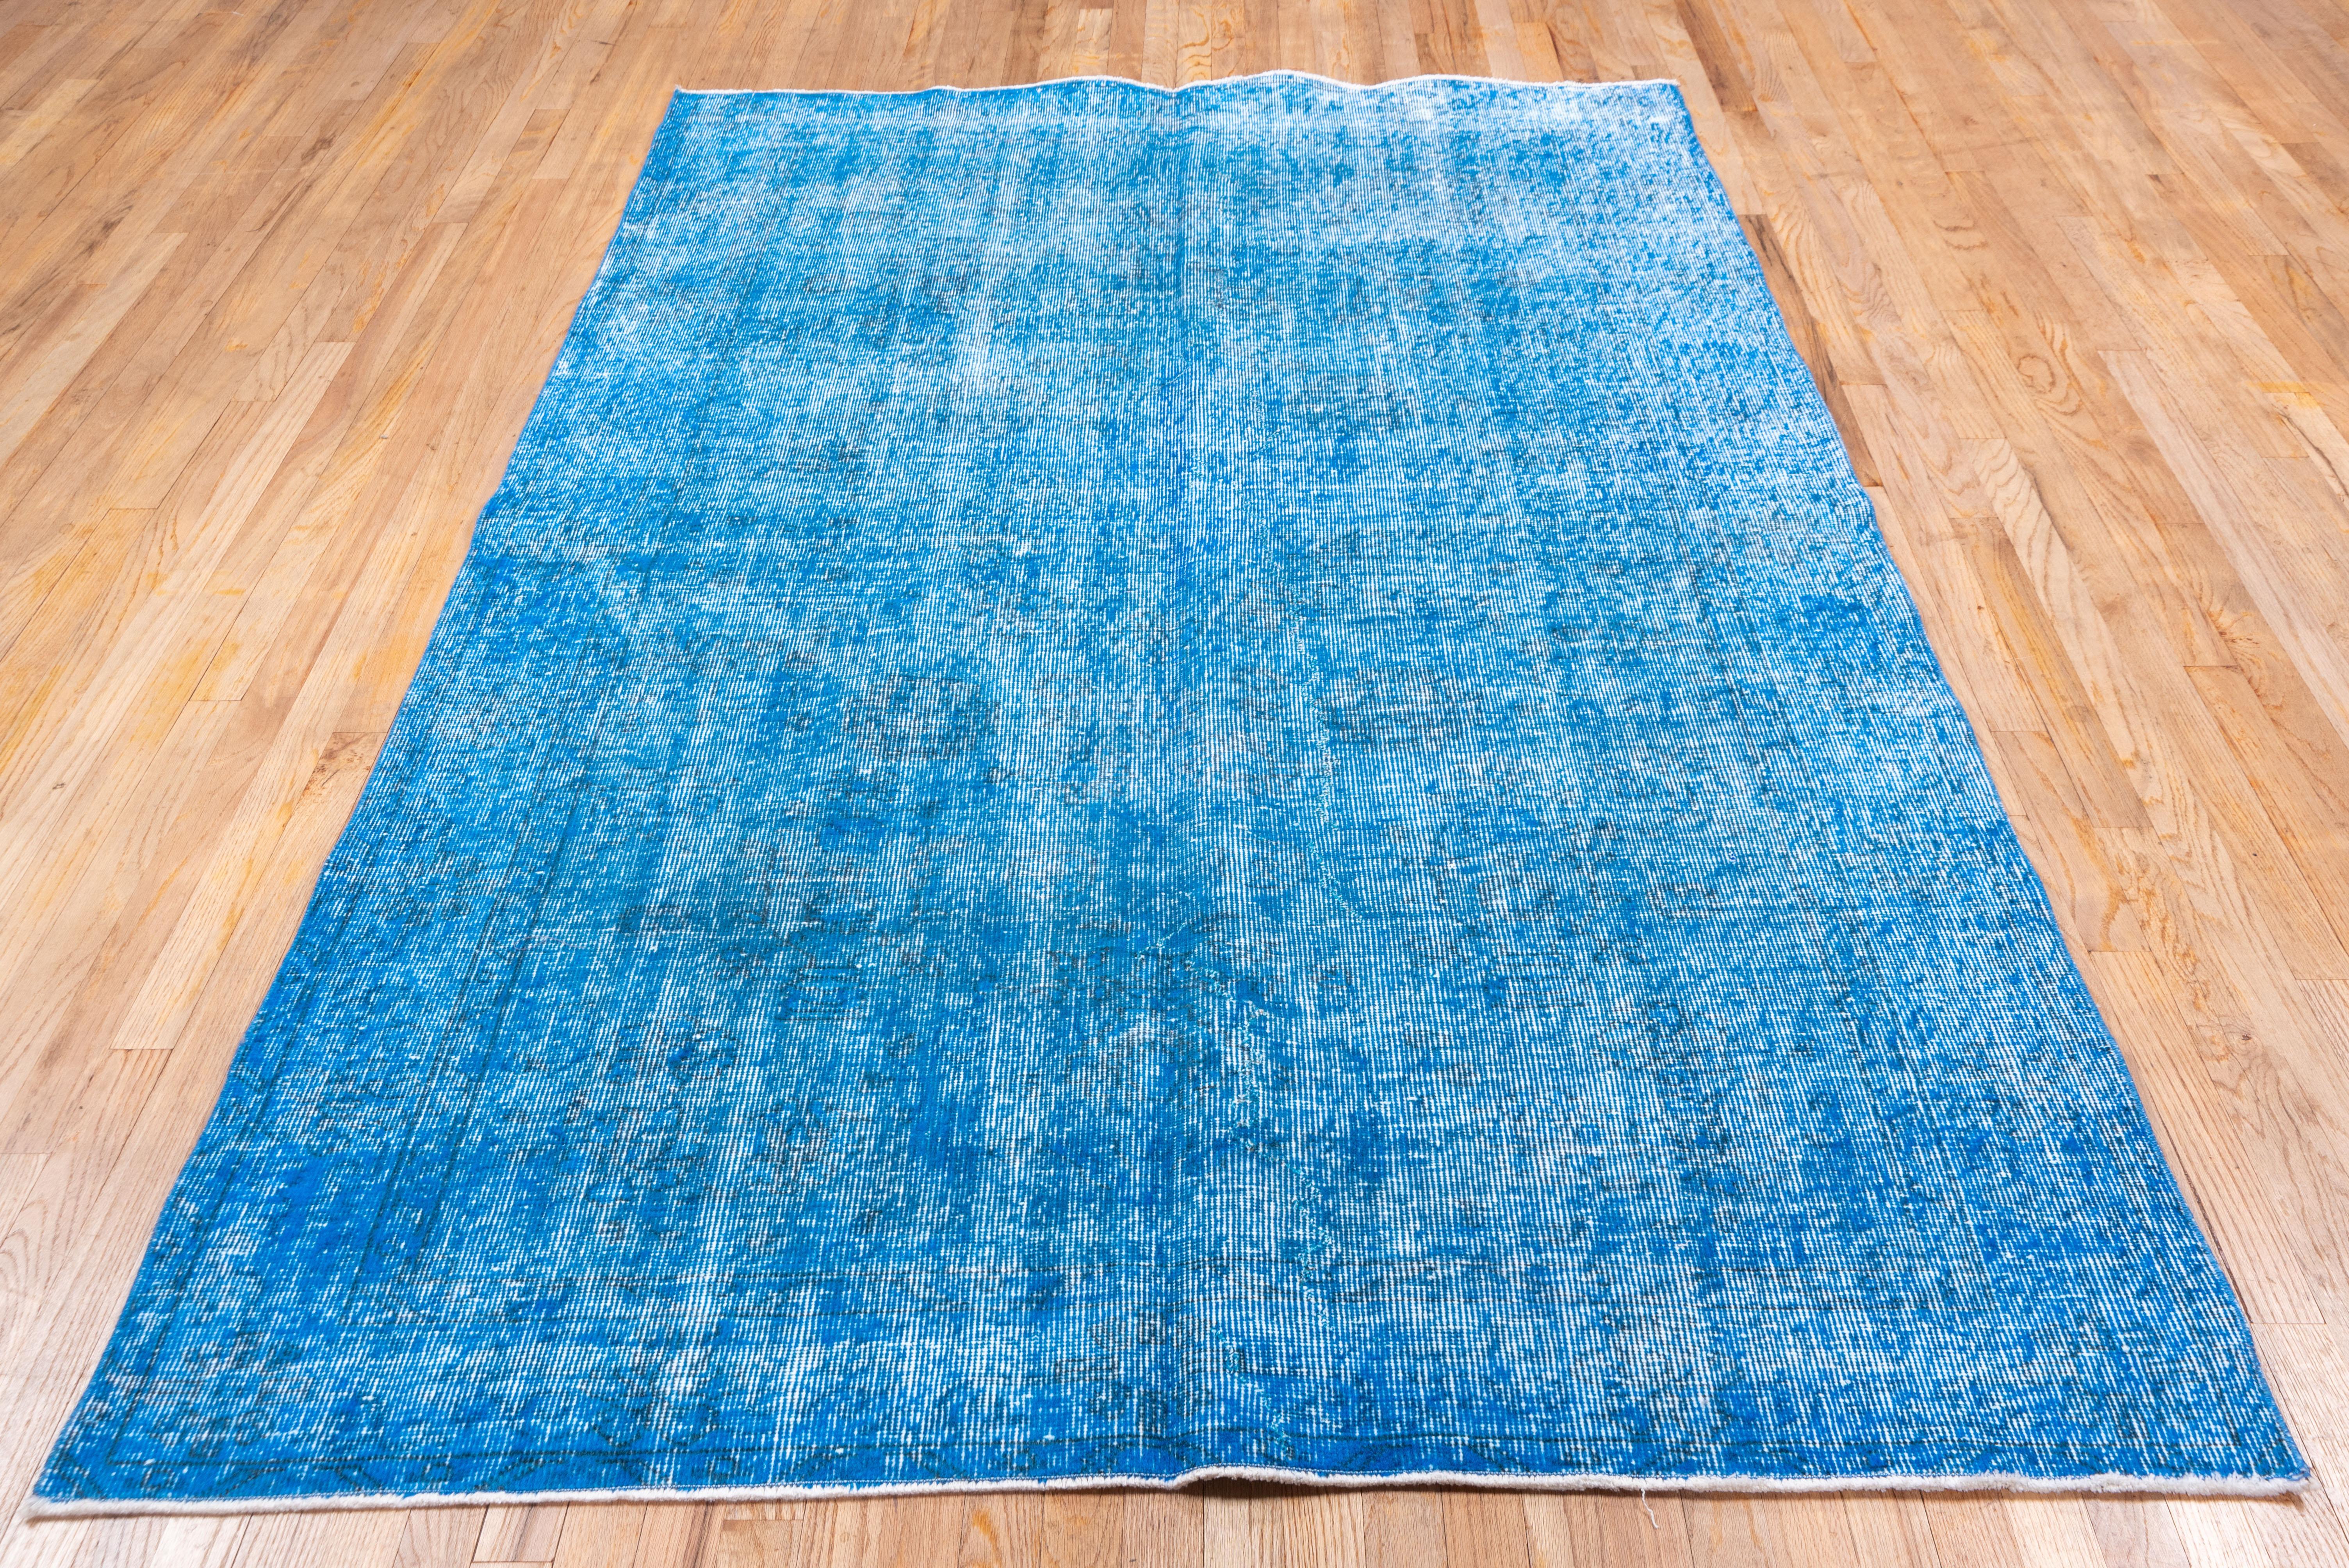 Mid-Century Modern Vintage Overdyed Blue Rug, Shabby Chic, Bright Colored For Sale